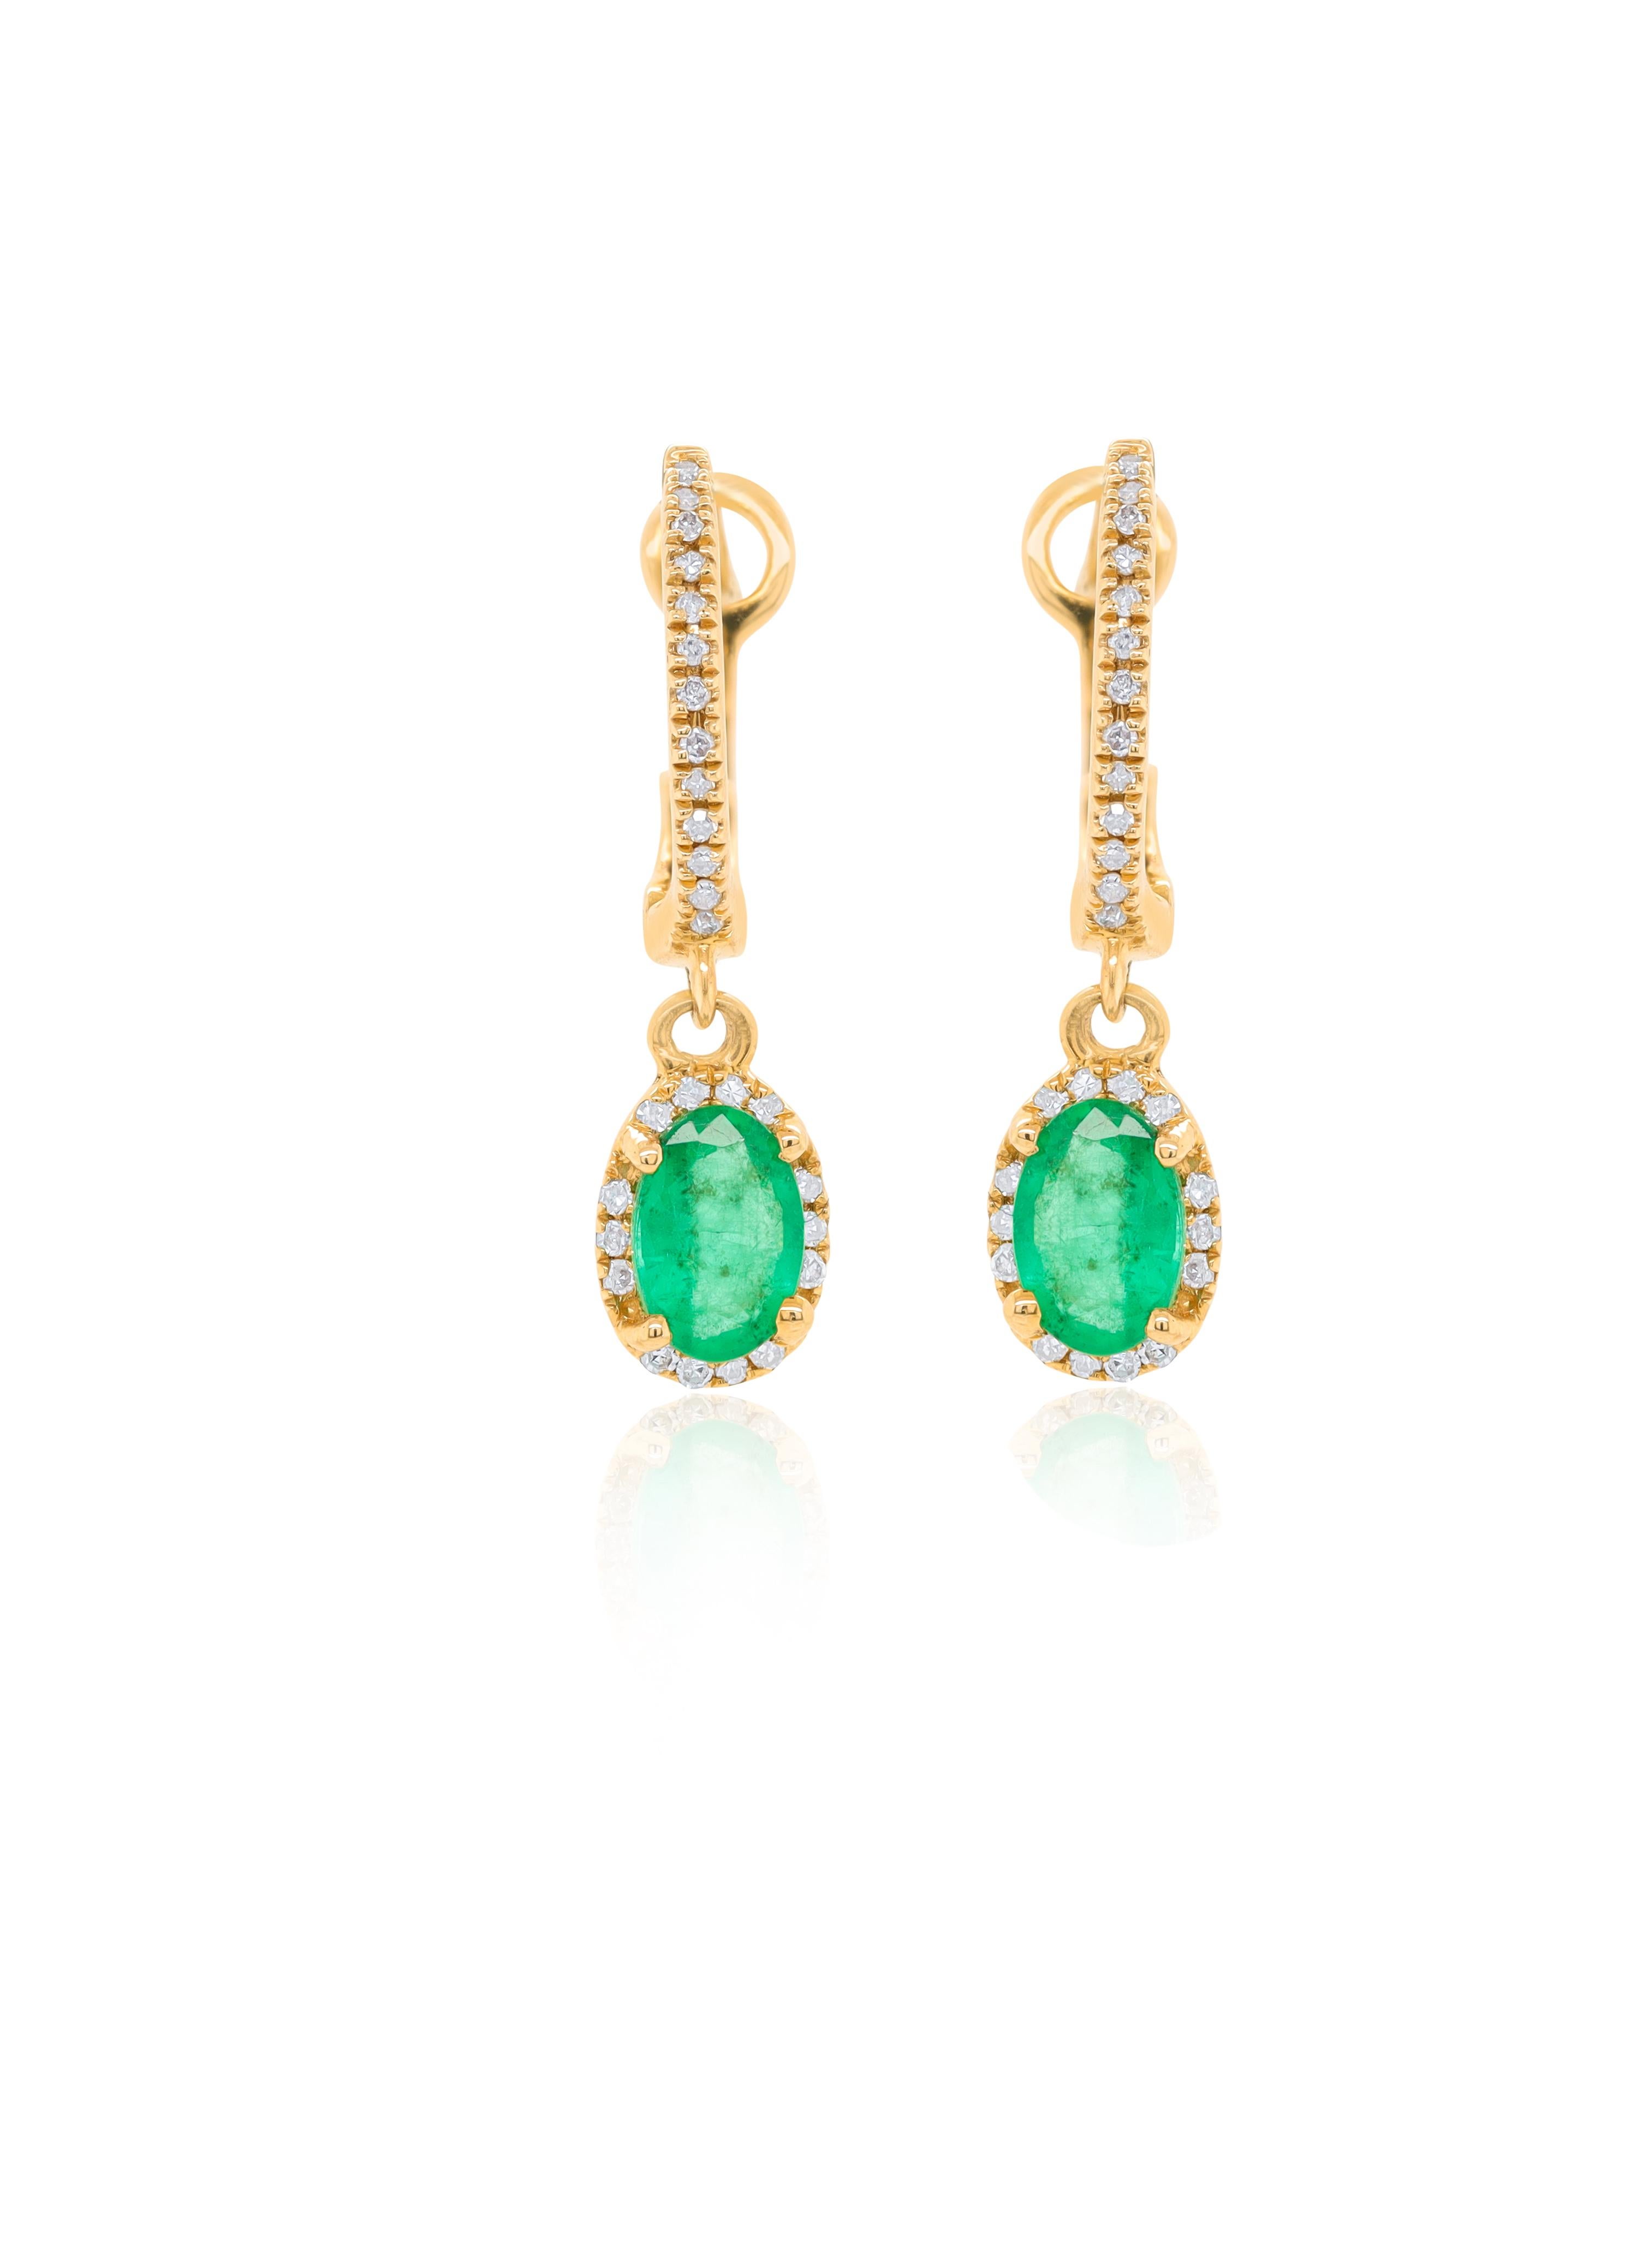 Round Cut 14K Yellow Gold Emerald and Diamond Earrings 